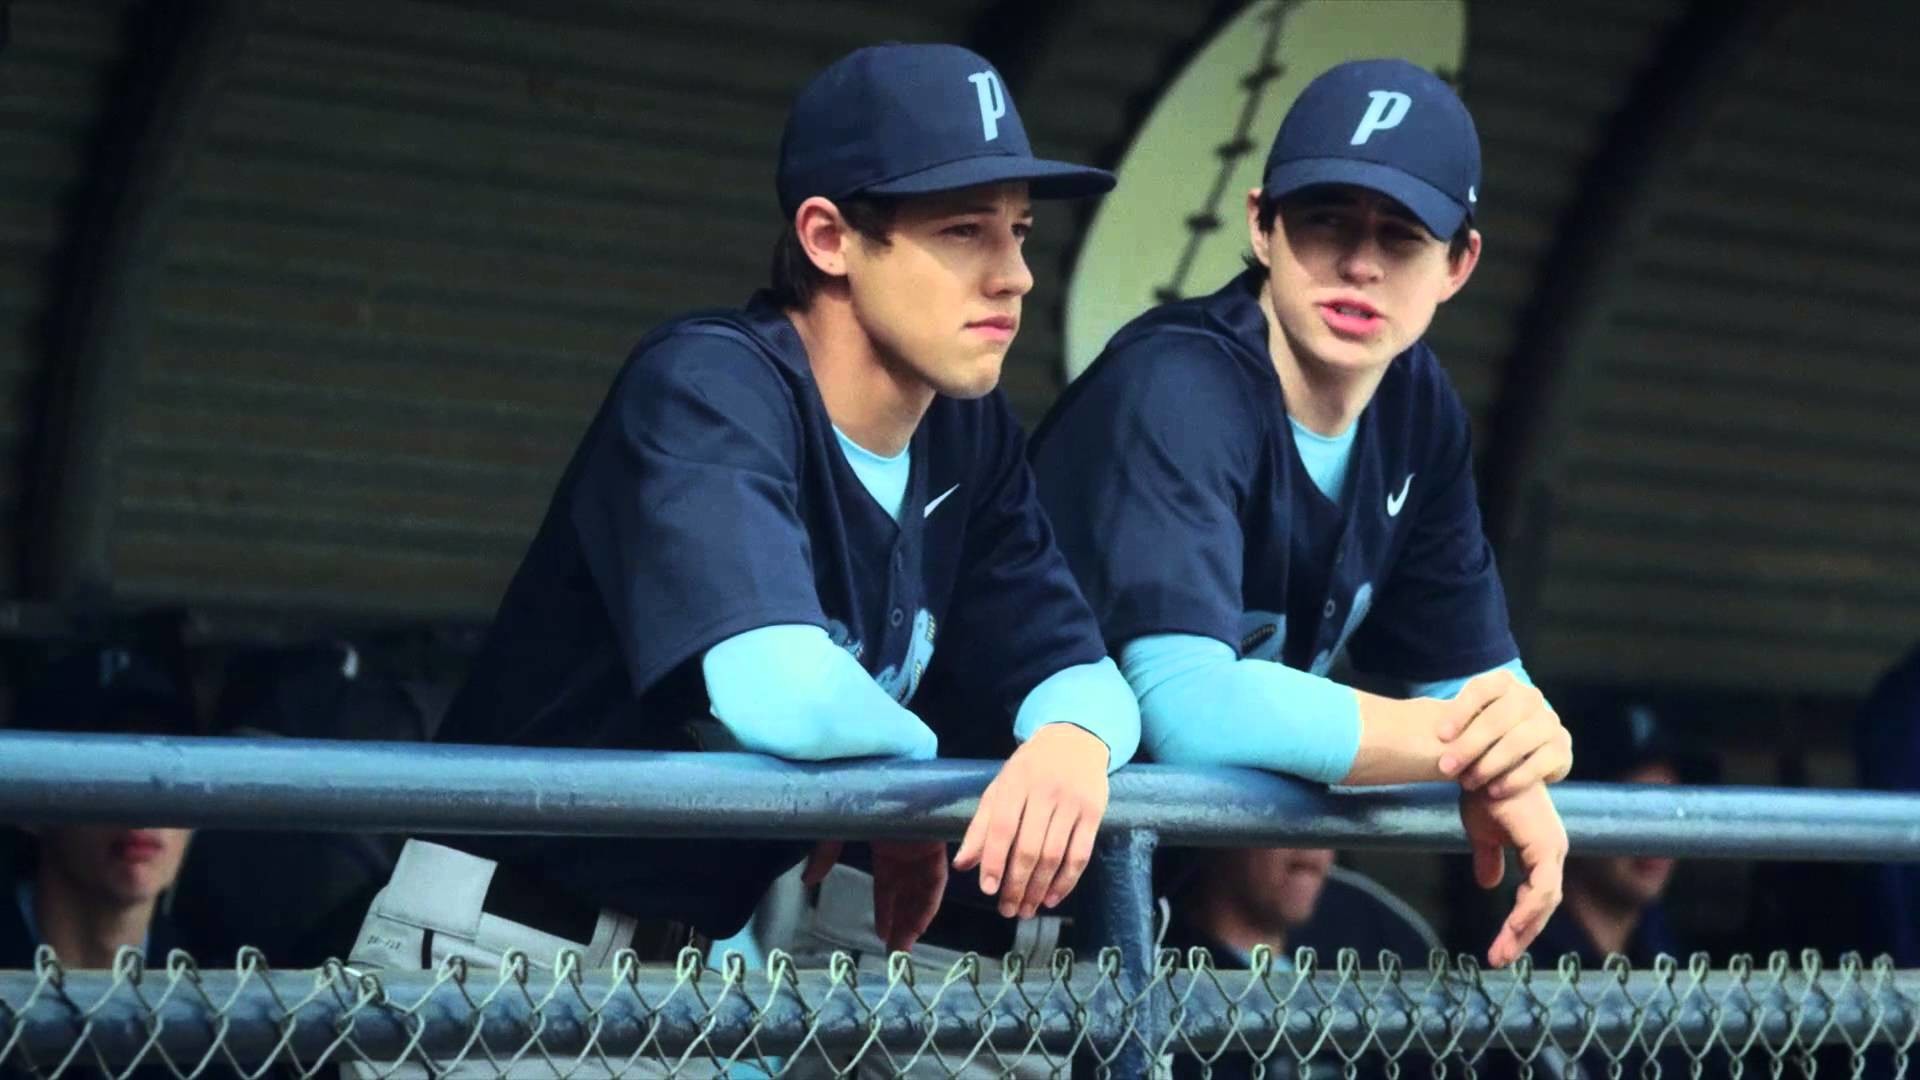 The outfield. Уэсли френч. Уэсли френч карьера.